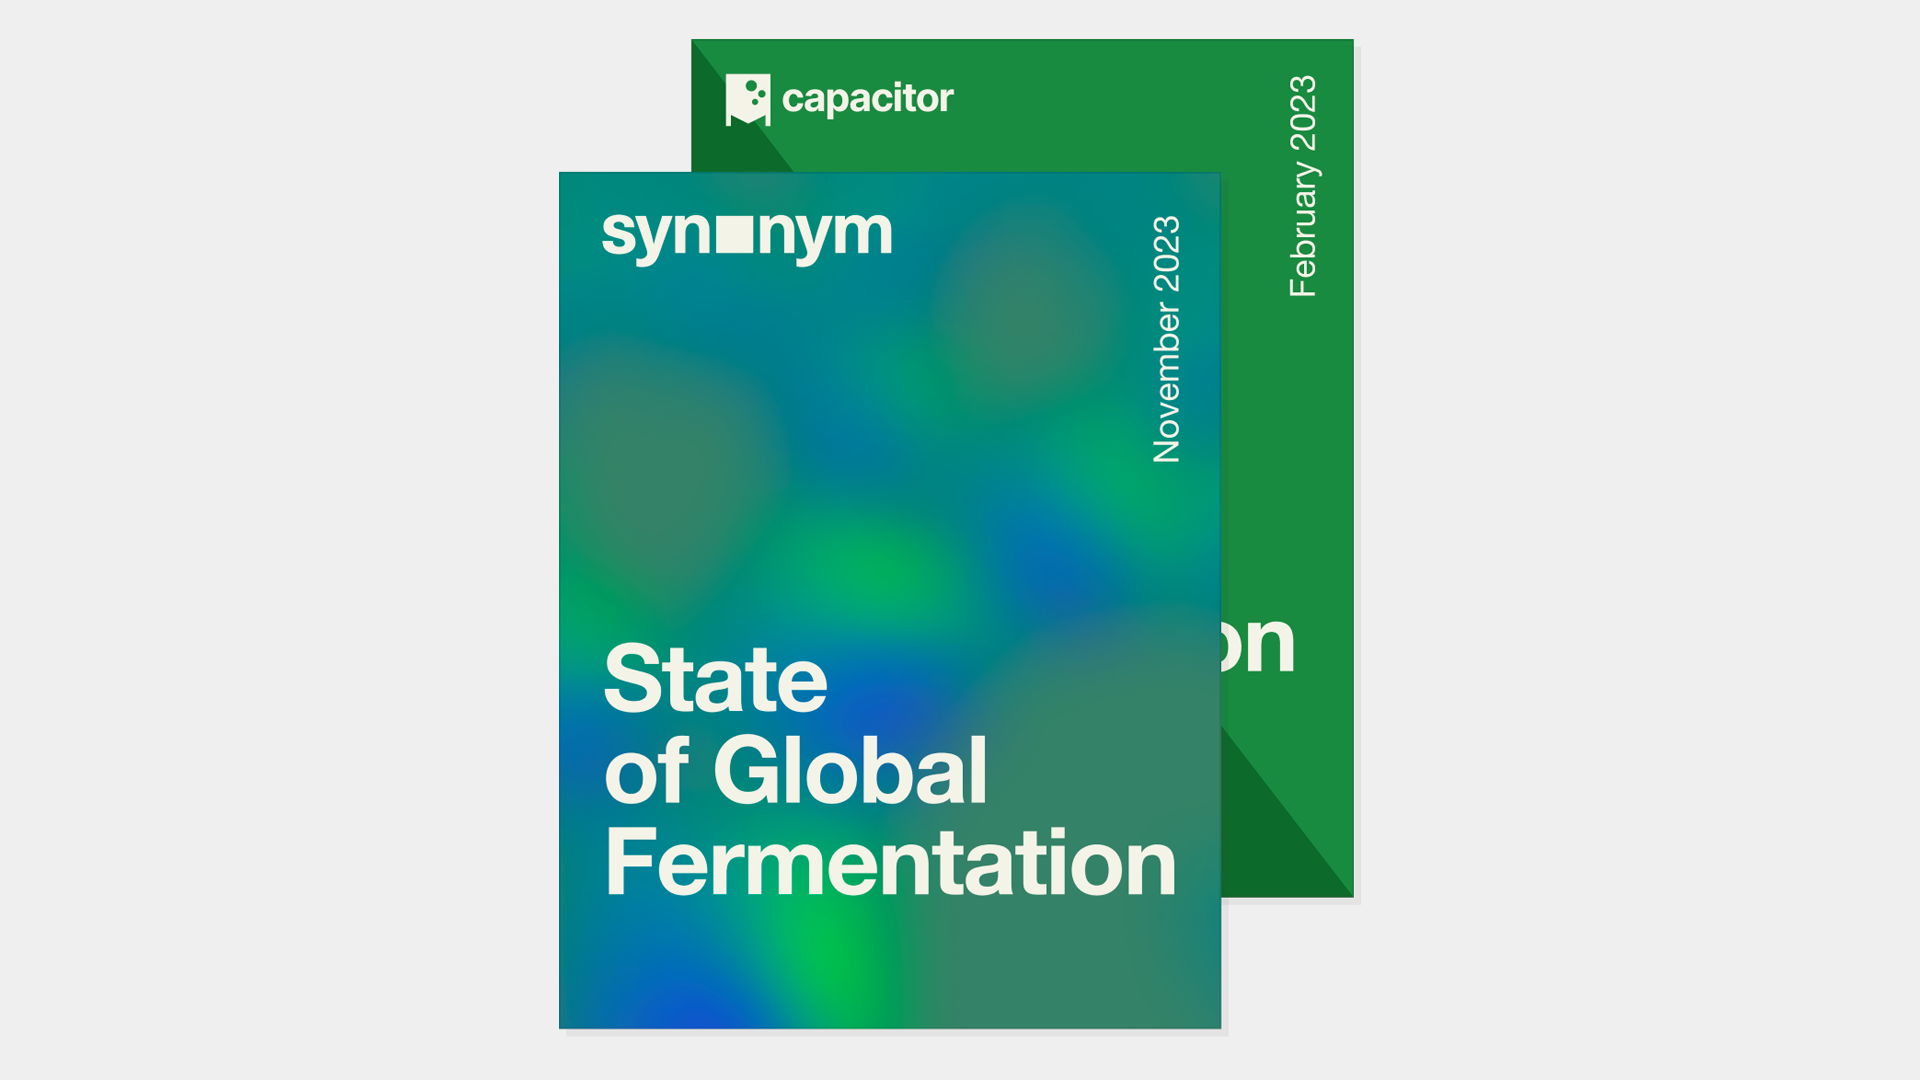 State of Global Fermentation Capacity